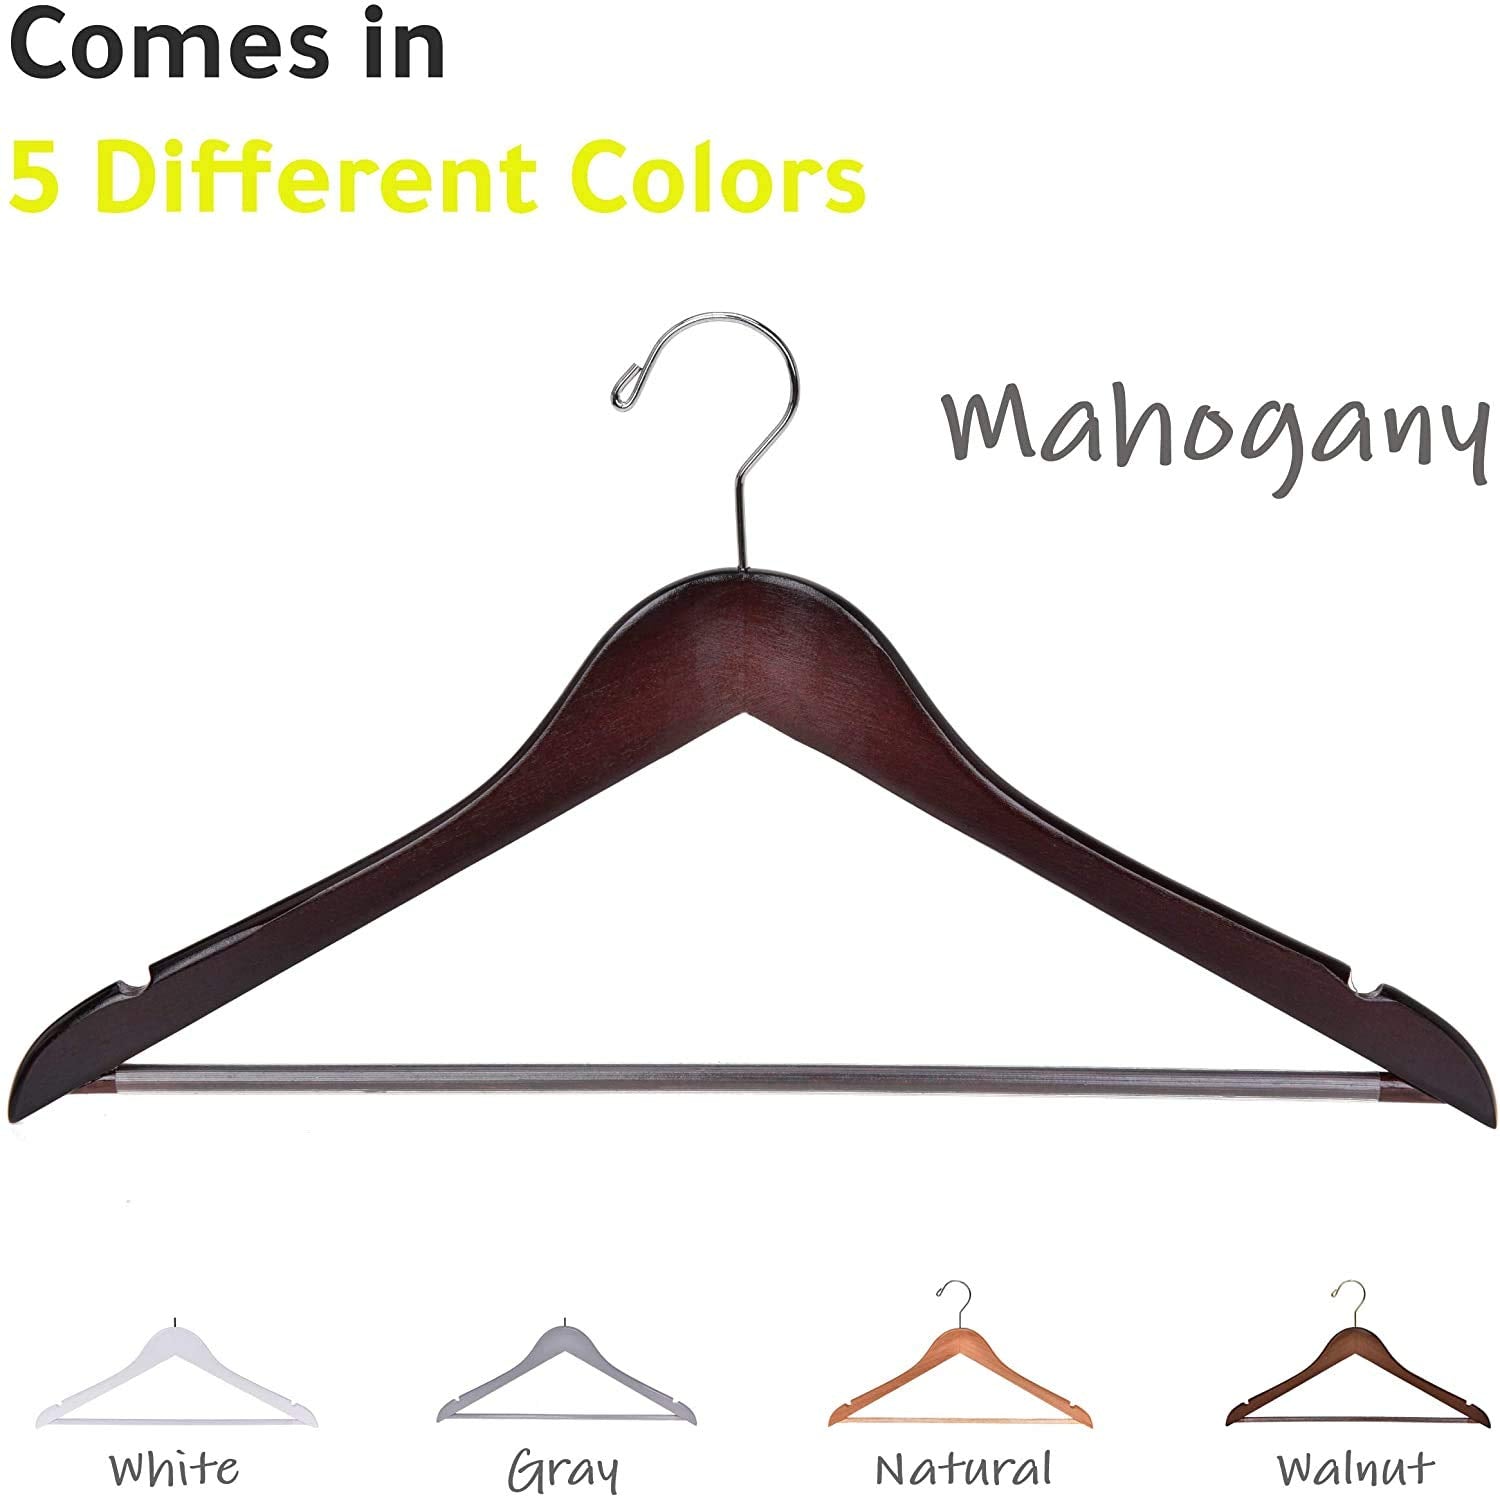 Quality Wooden Hangers - Slightly Curved Hanger 30-Pack Sets - Solid Wood Coat Hangers with Stylish Chrome Hooks - Heavy-Duty Clothes, Jacket, Shirt, Pants, Suit Hangers (Mahogany, 30)  - Like New